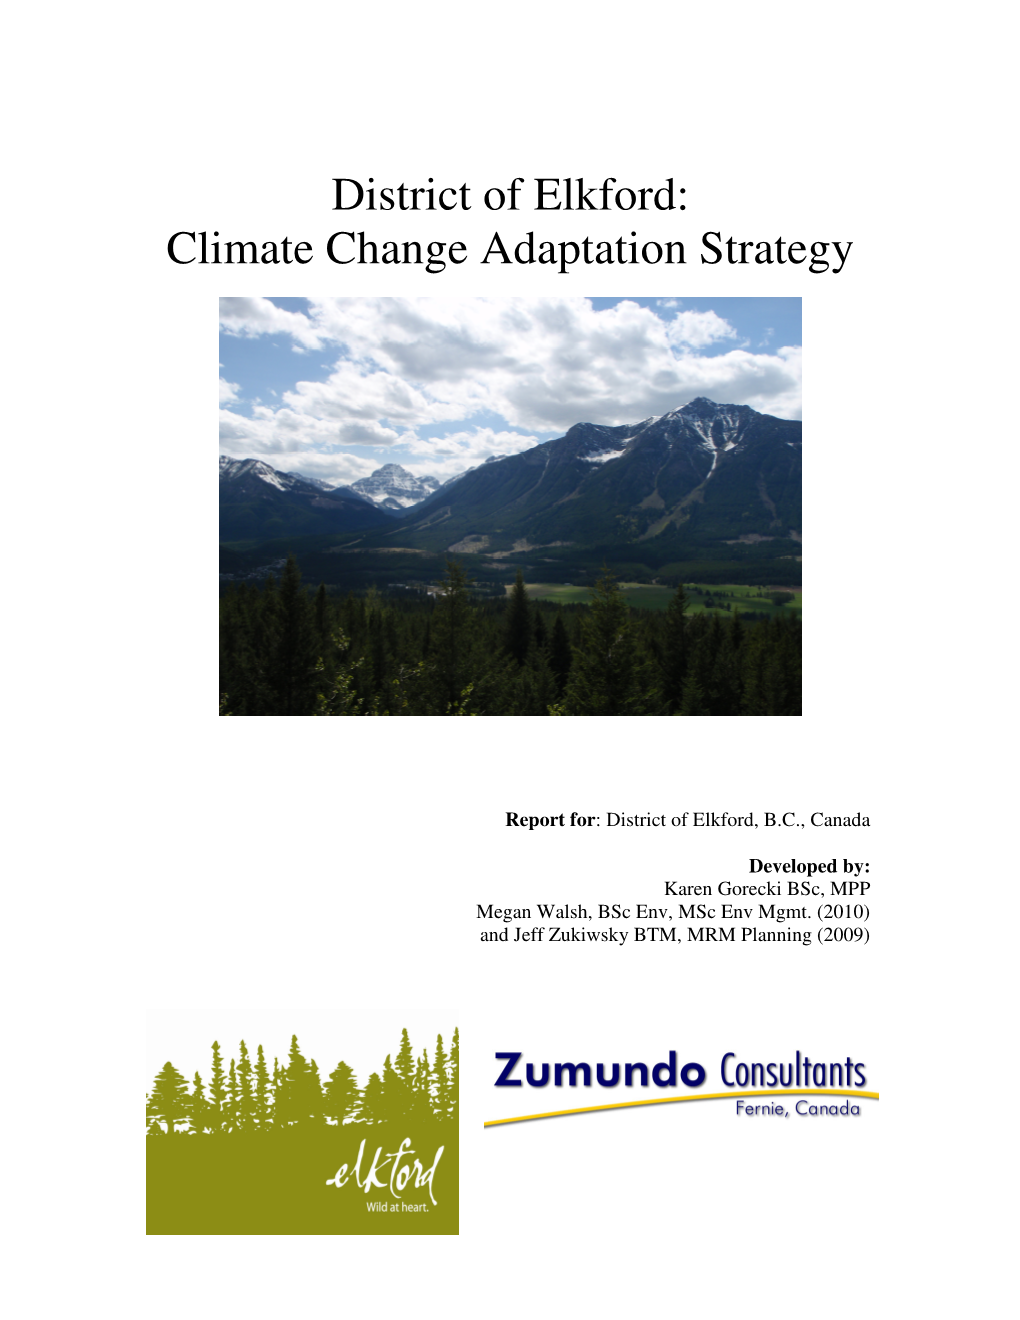 District of Elkford: Climate Change Adaptation Strategy